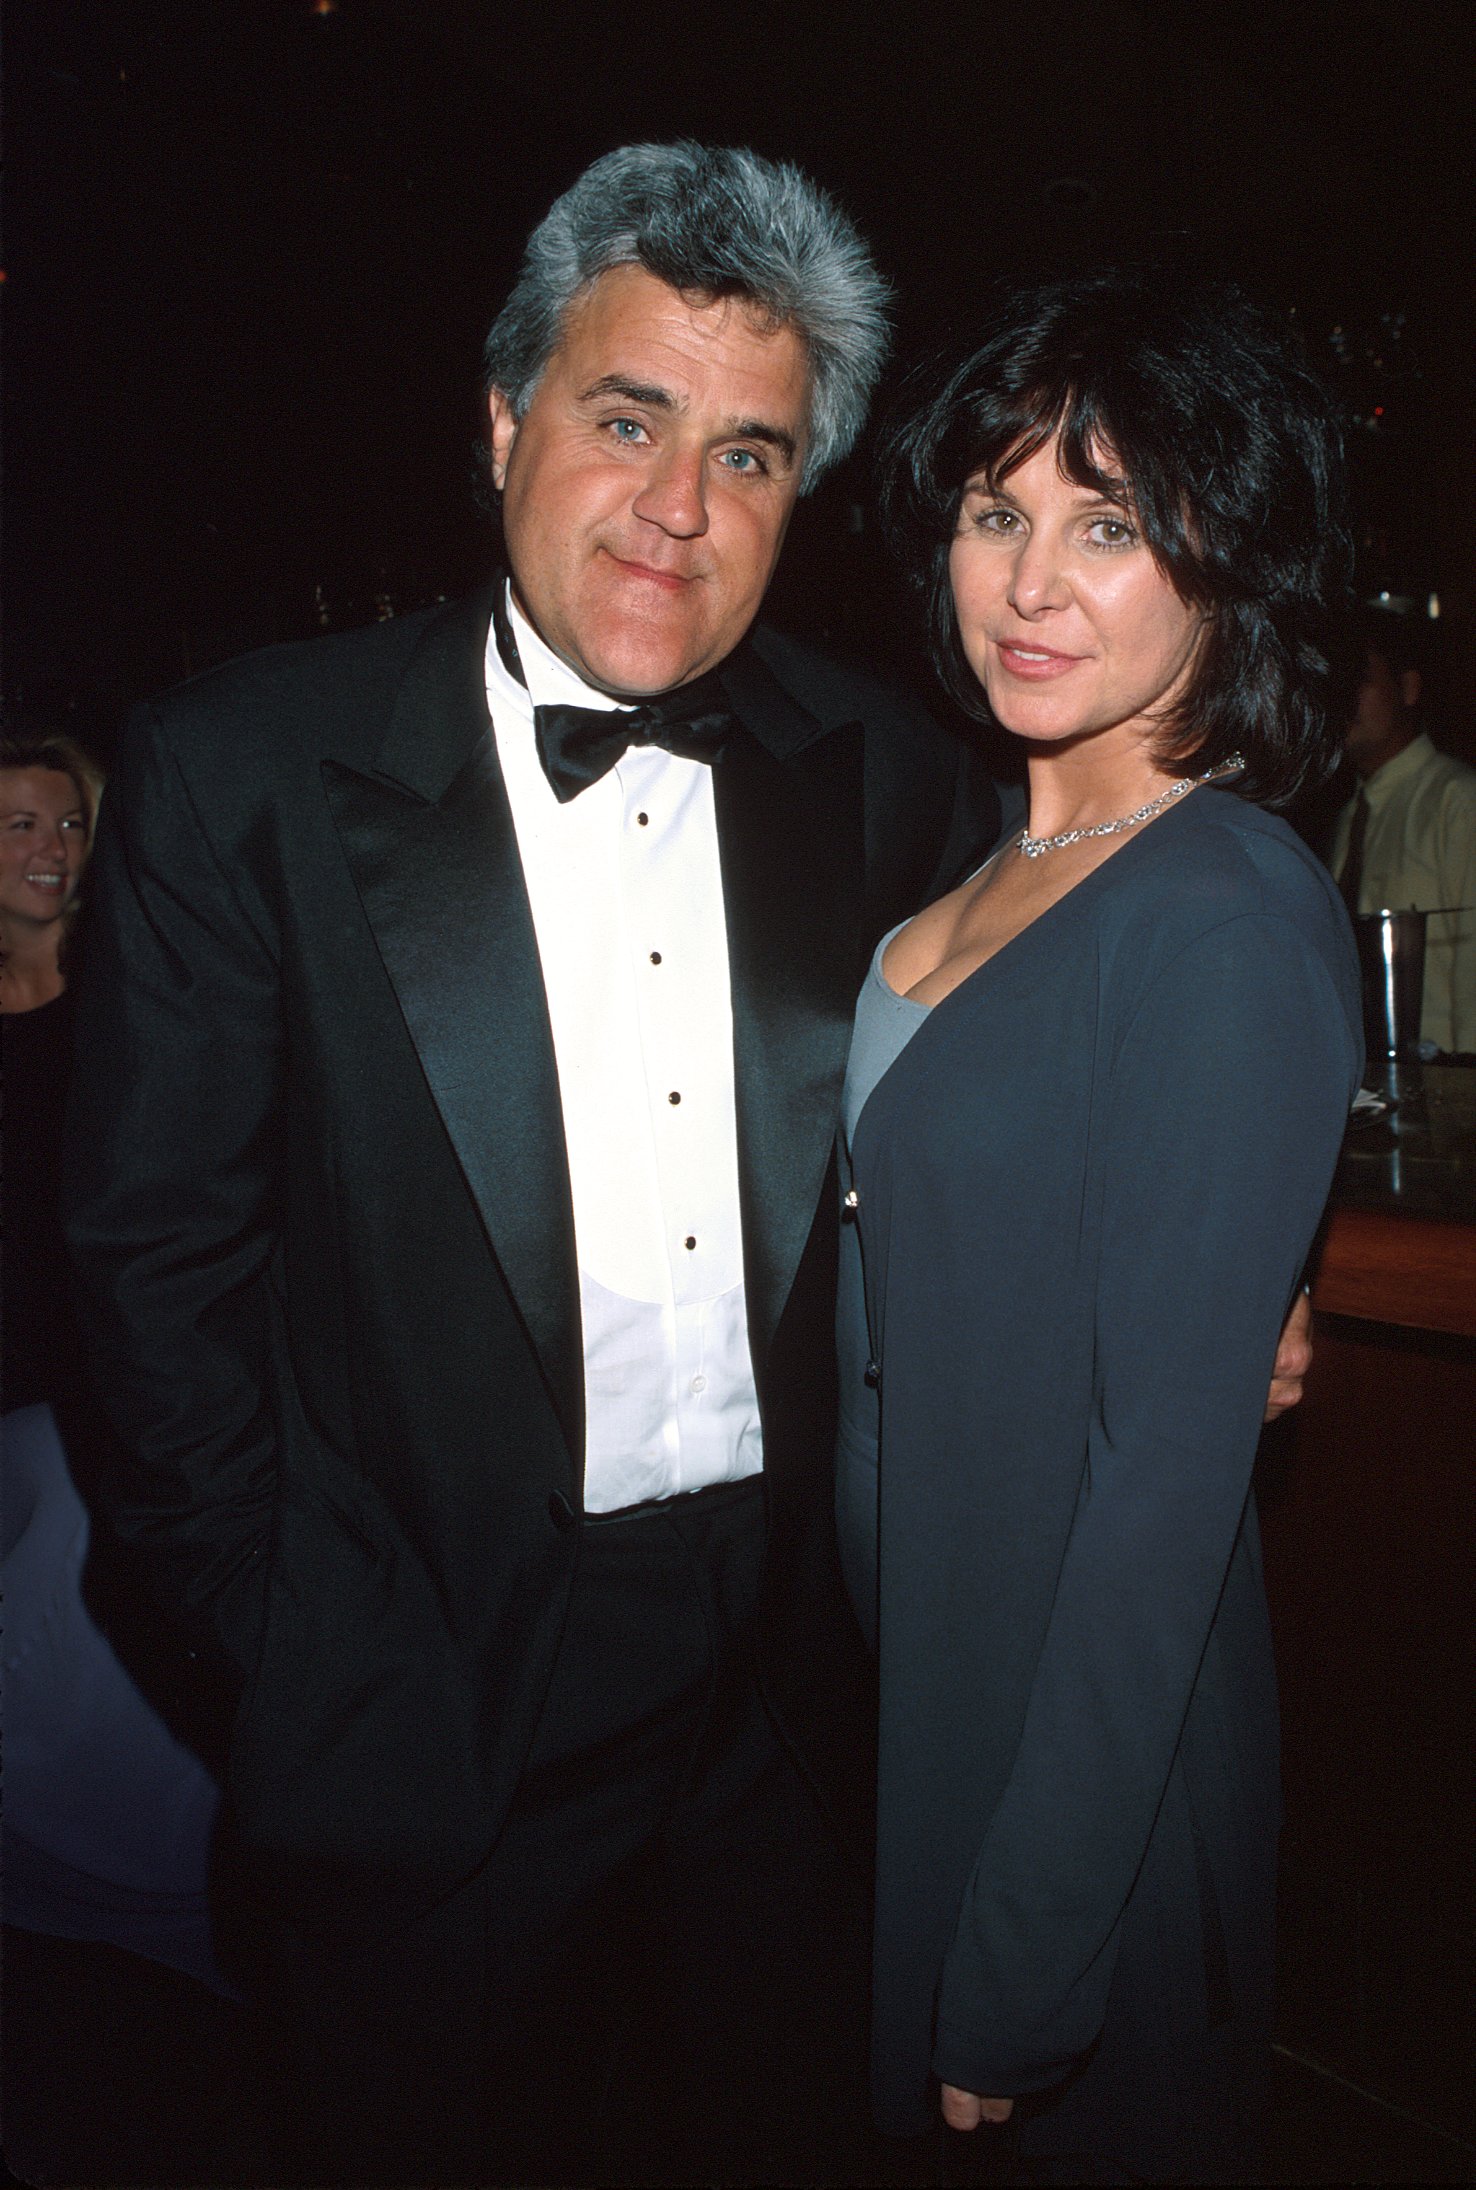 Jay Leno & wife Mavis during The 70th Annual Academy Awards, 1998 | Source: Getty Images